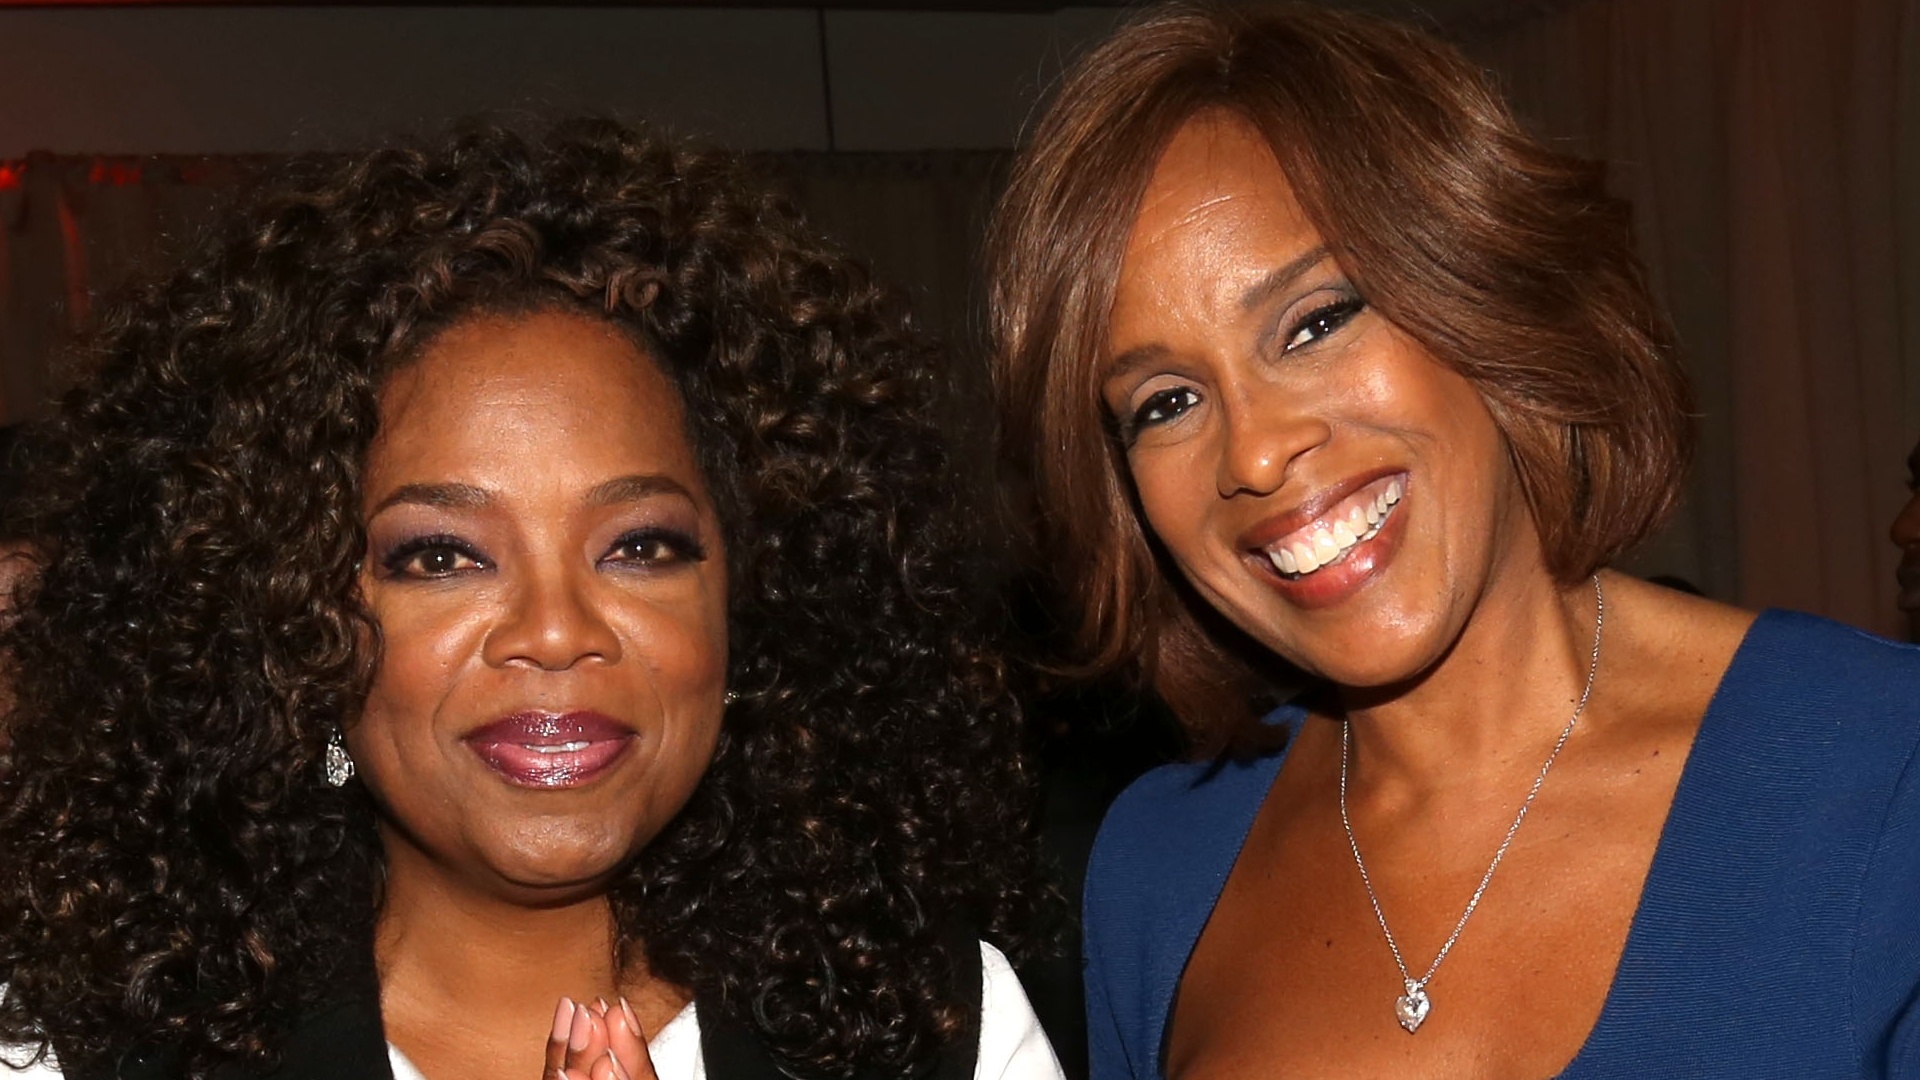 Gayle King, Oprah, Love and relationship questions, Sheknows, 1920x1080 Full HD Desktop